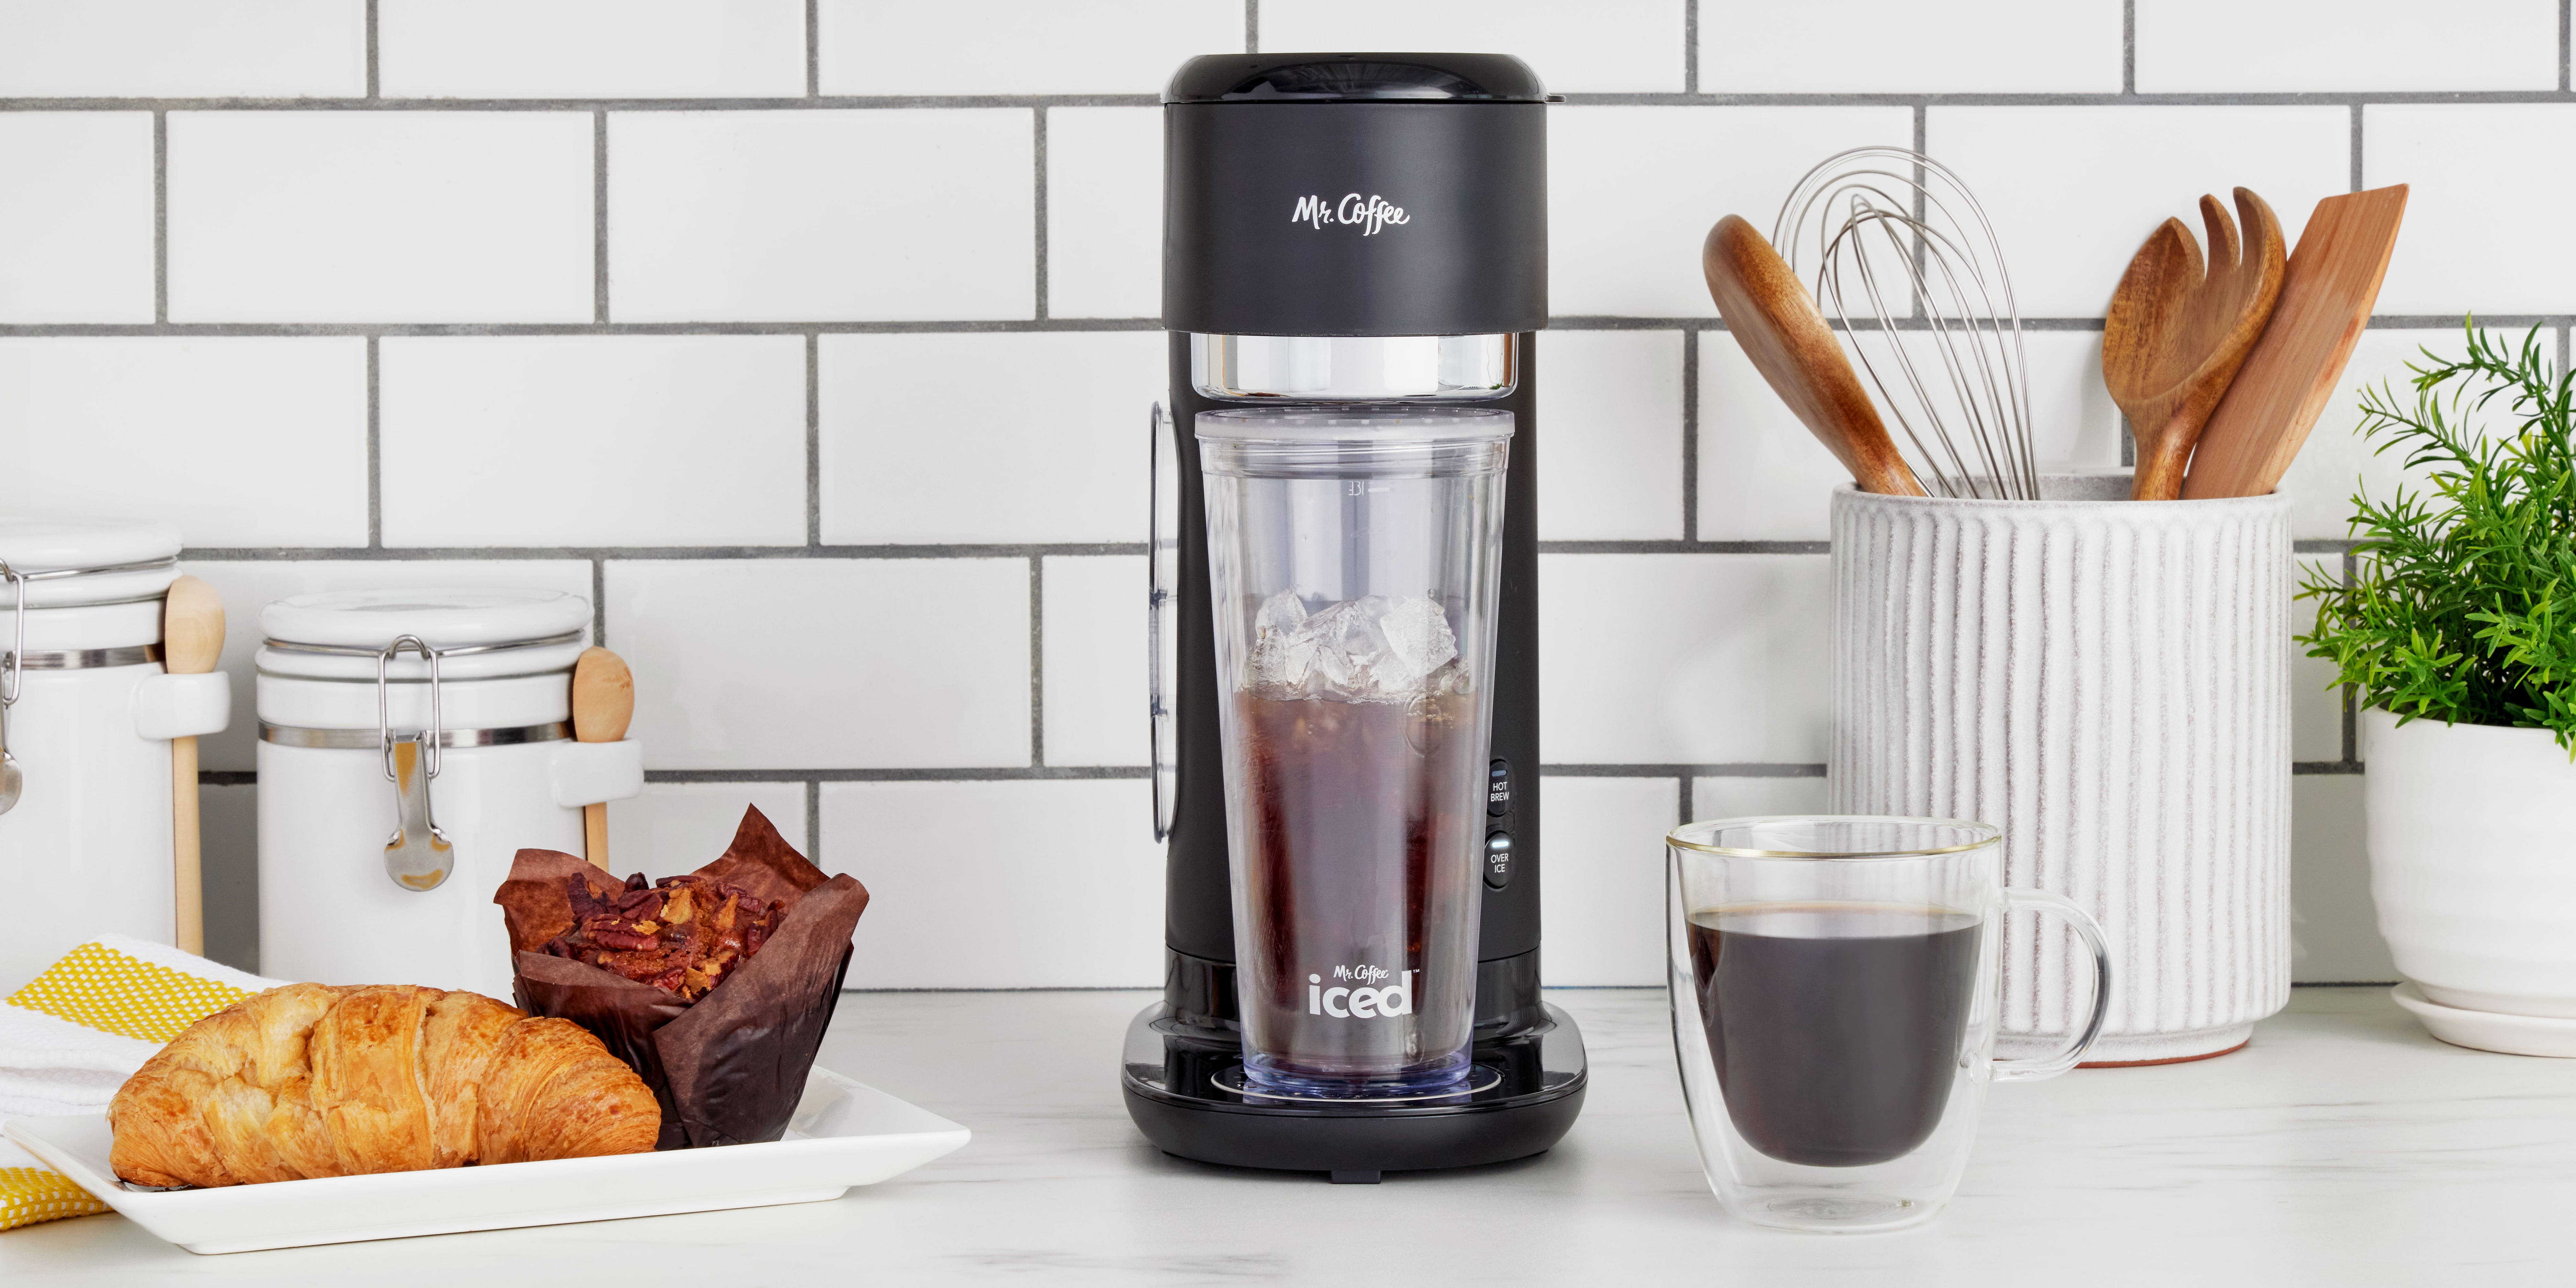 Mr. Coffee now sells an iced coffee maker